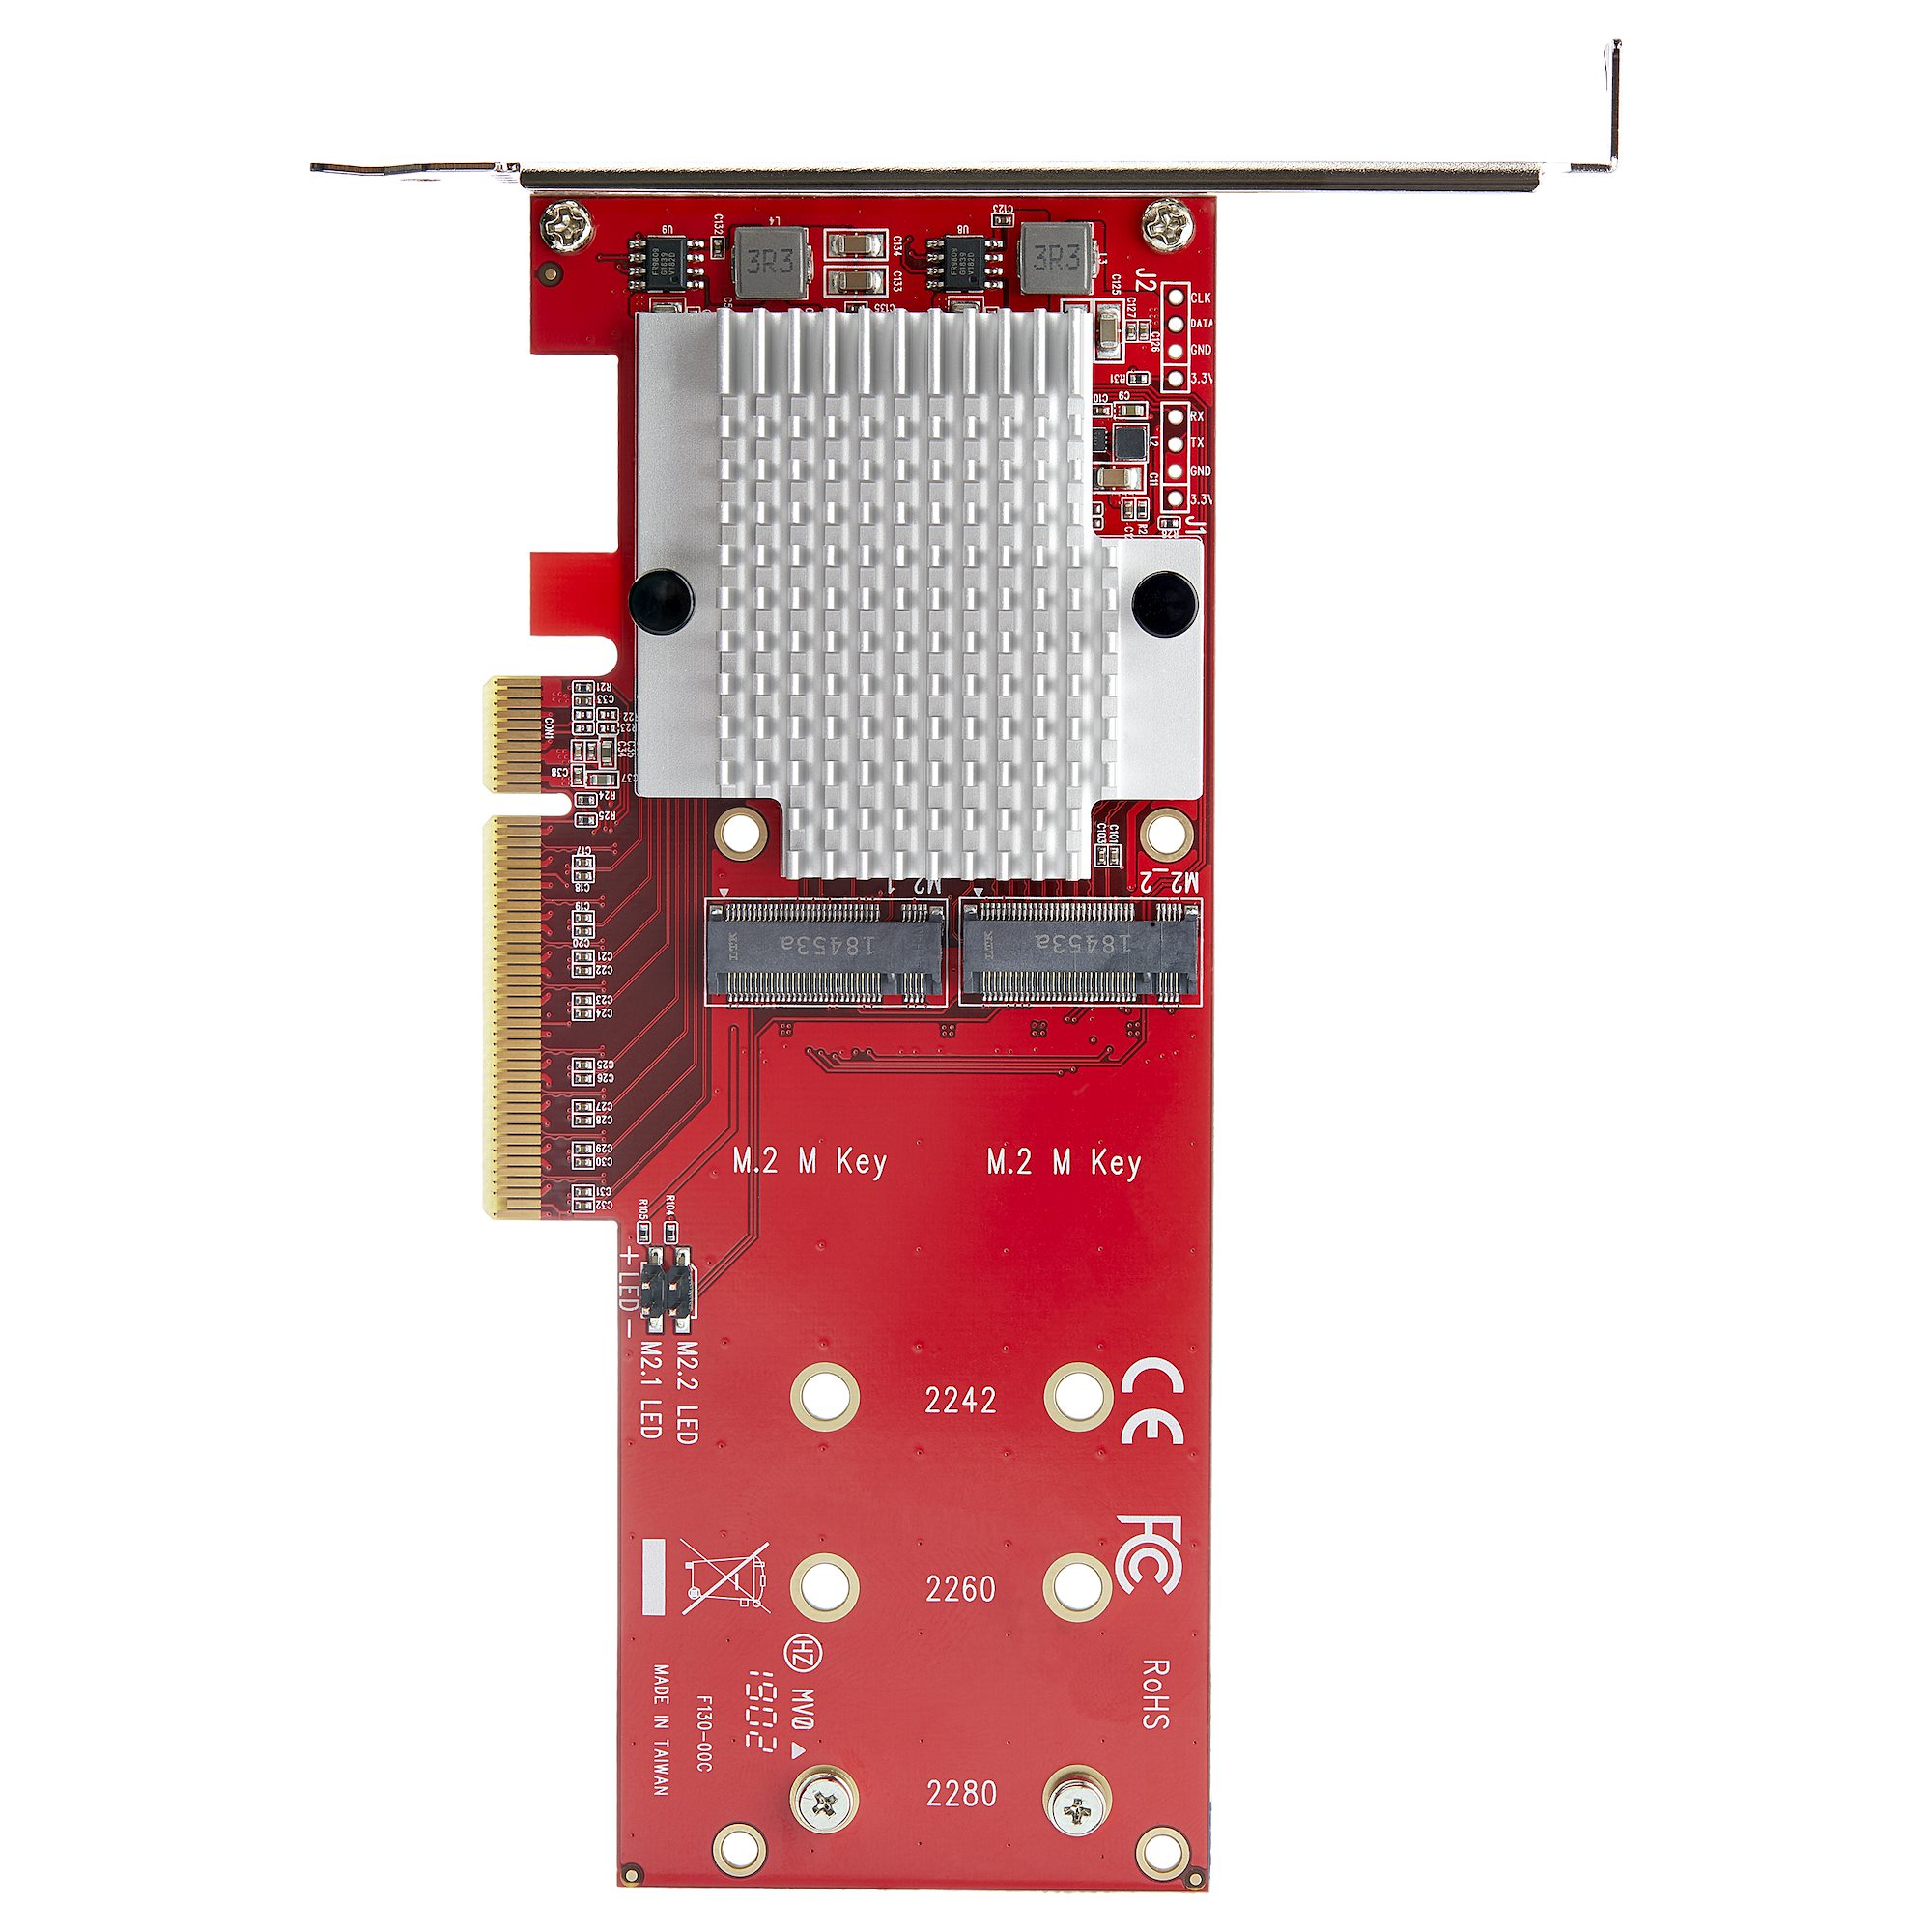 Dual M.2 PCIe SSD Adapter Card - x8 / x16 Dual NVMe or AHCI M.2 SSD to PCI  Express 3.0 - M.2 NGFF PCIe (M-Key) Compatible - Supports 2242, 2260, 2280 